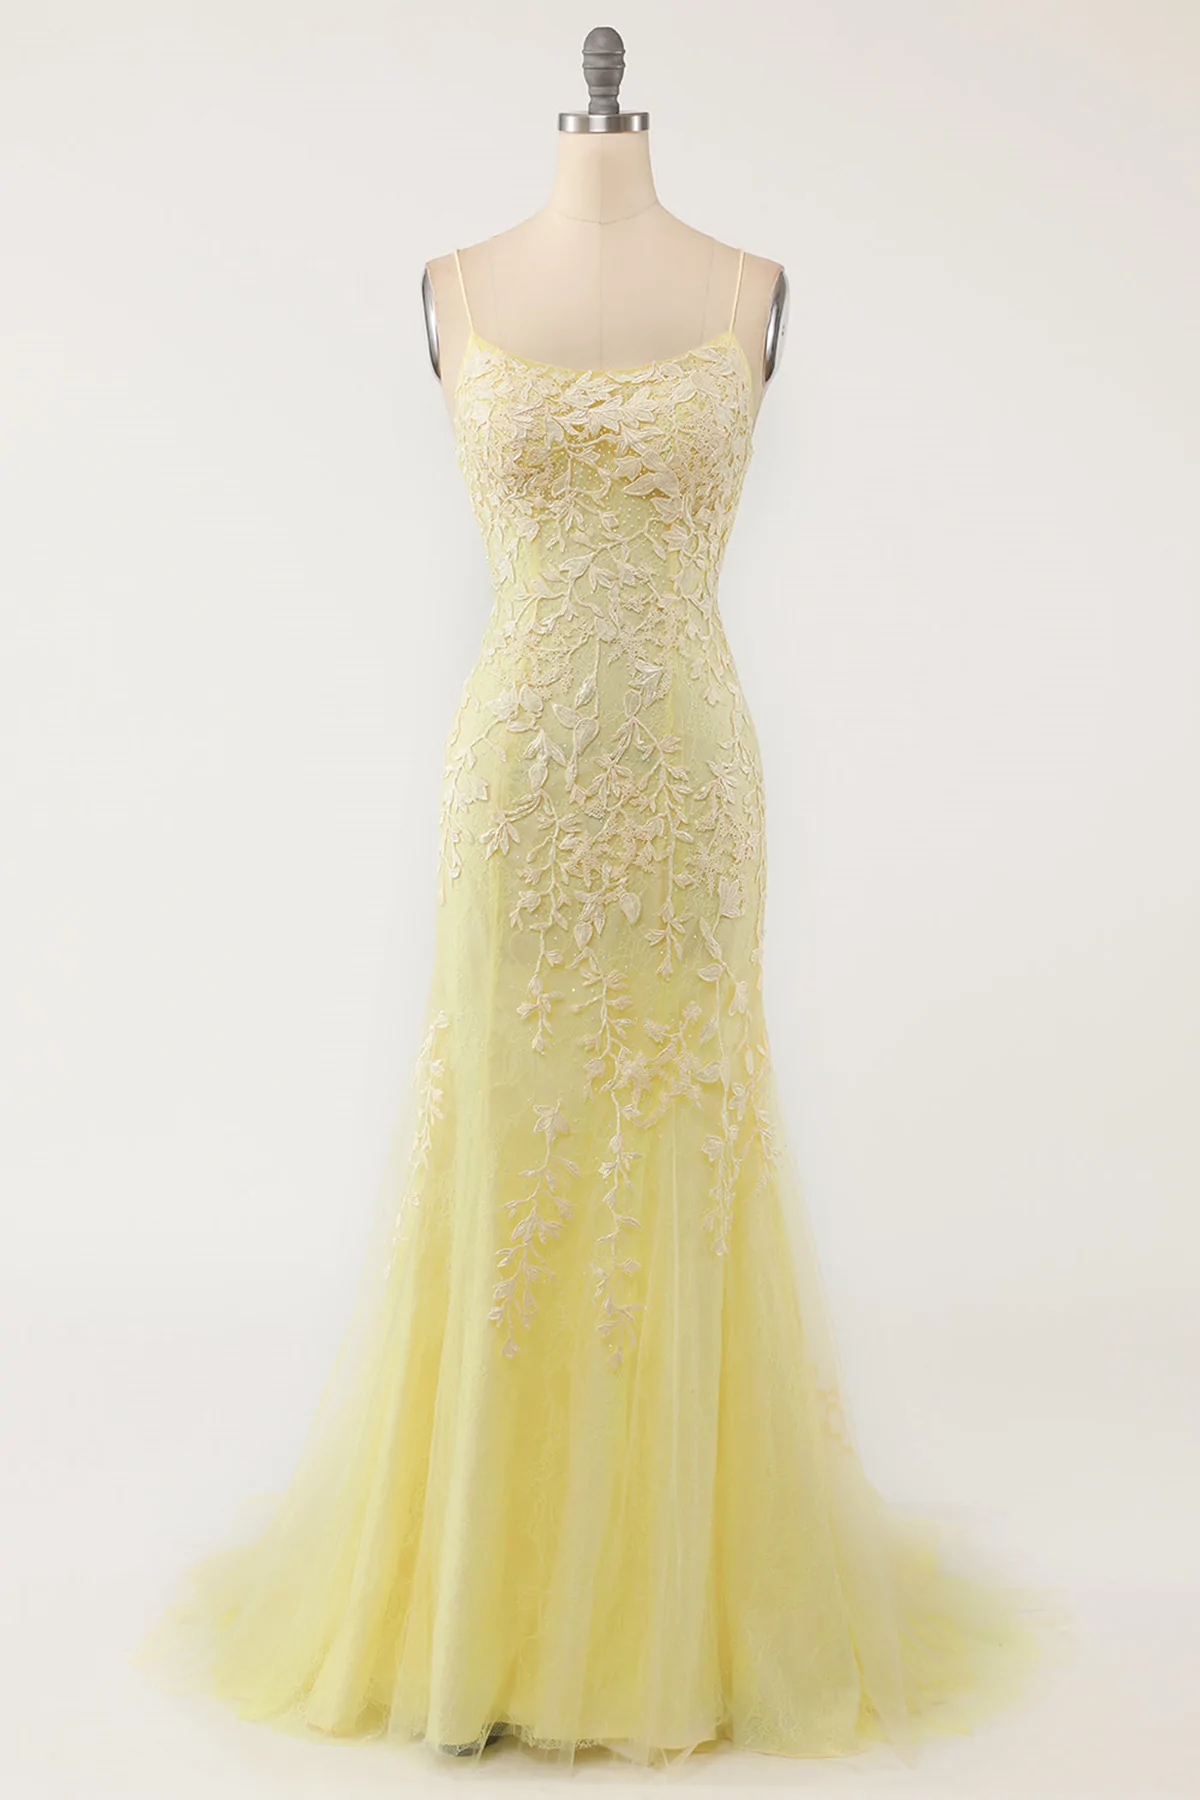 Backless Yellow Lace Long Prom Dresses, Mermaid Yellow Formal Dresses, Yellow Lace Evening Dresses